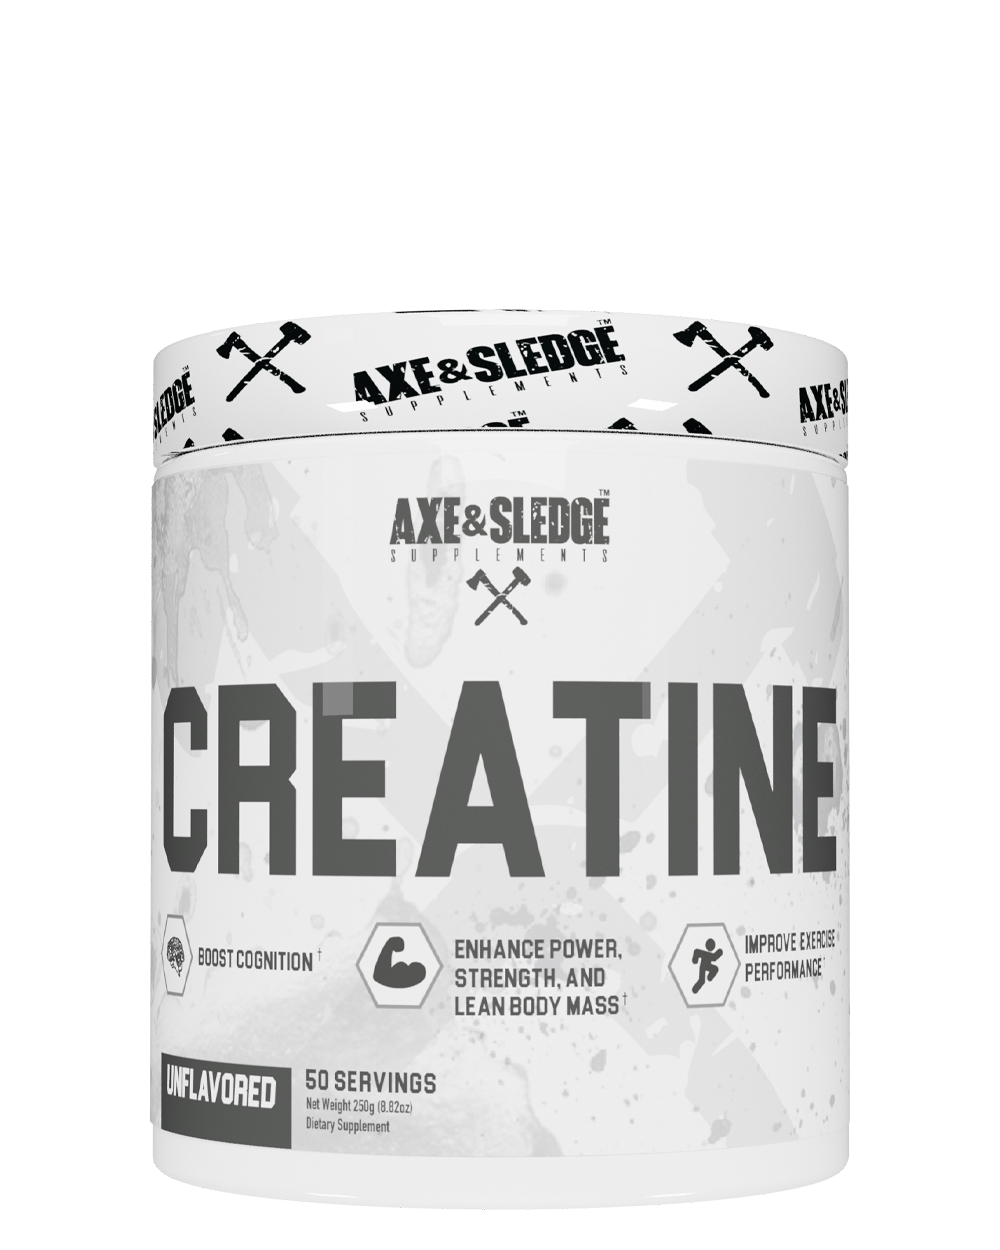 Pure Creatine Monohydrate: Our formula is grounded in the purest form of creatine monohydrate, a tried-and-true ingredient known for its effectiveness in enhancing strength, power, and muscle recovery.